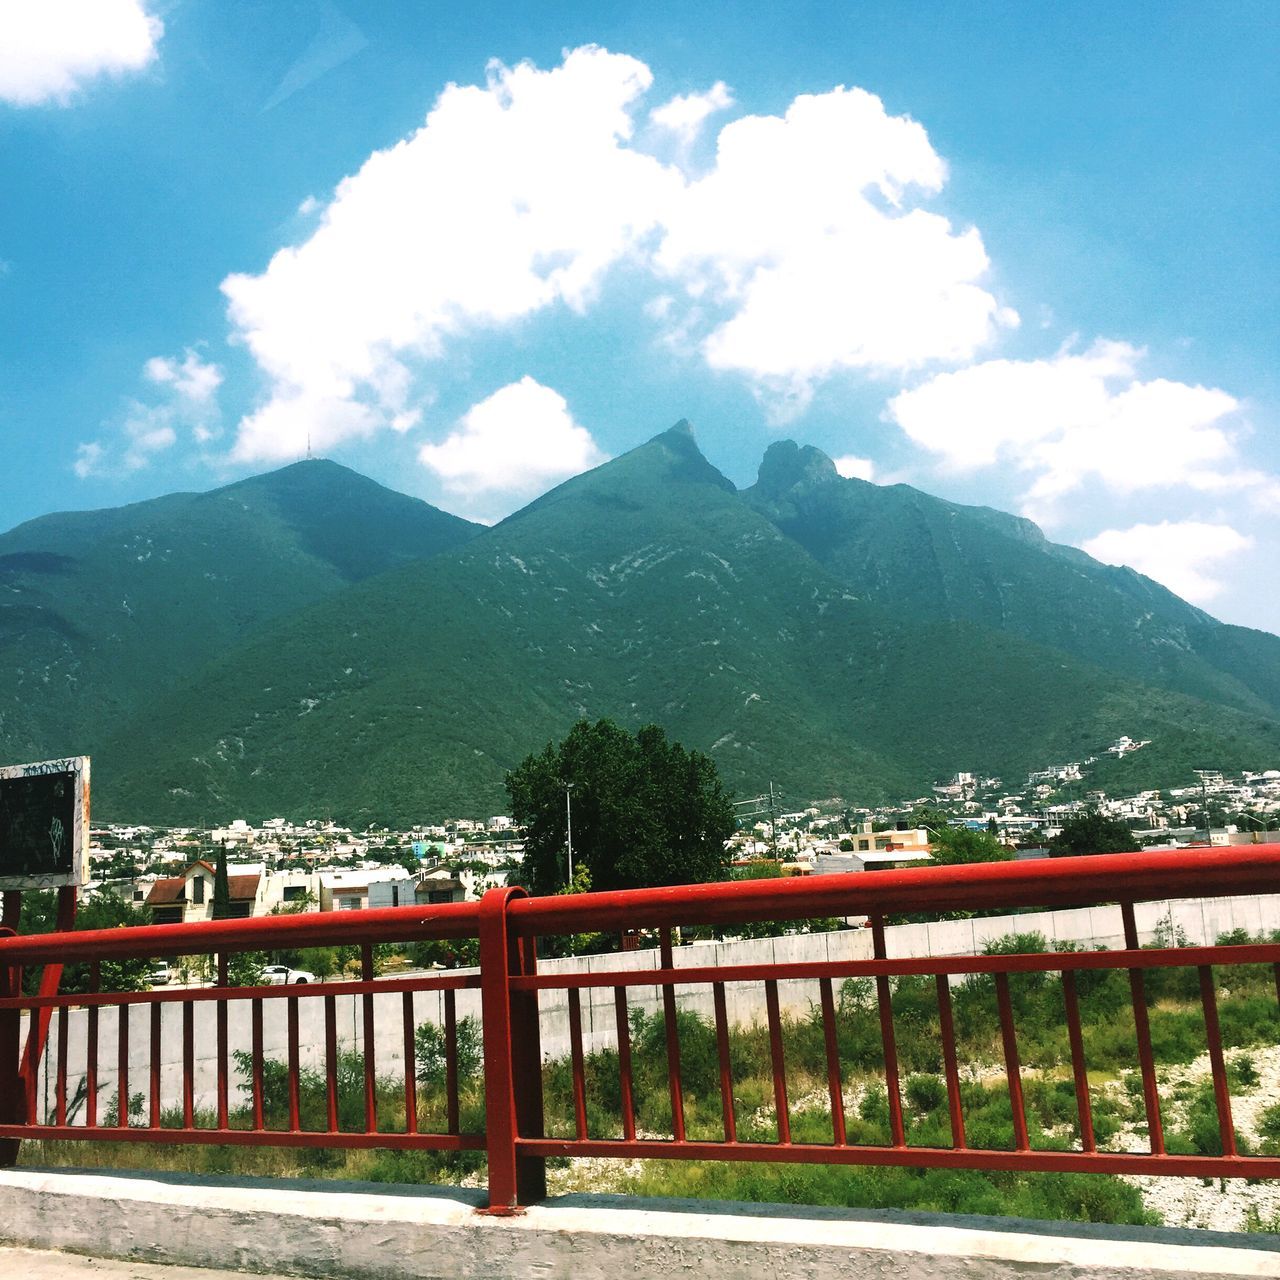 mountain, mountain range, sky, railing, built structure, architecture, cloud - sky, cloud, bridge - man made structure, connection, tranquility, beauty in nature, nature, scenics, tree, tranquil scene, river, transportation, day, landscape